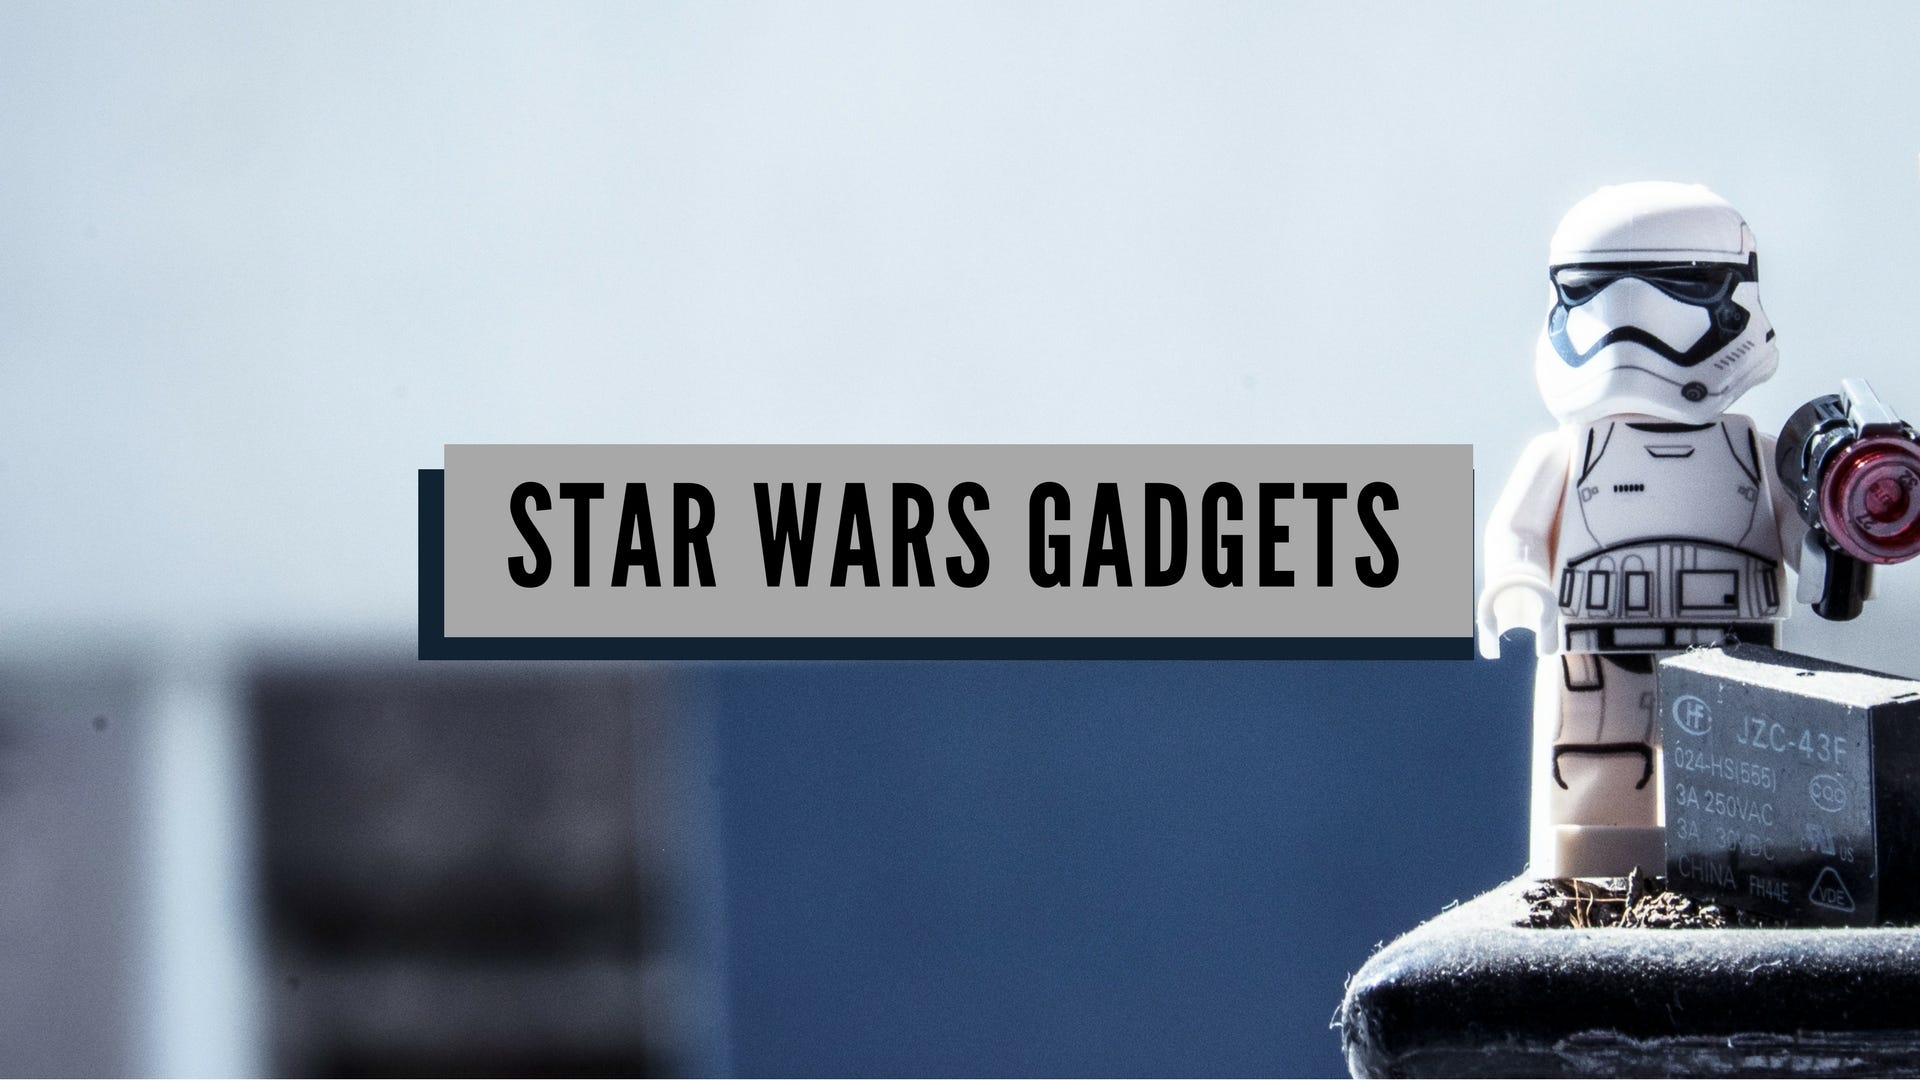 12 Star Wars gadgets for the coolest geek in your life, by Gadget Flow, Gadget Flow